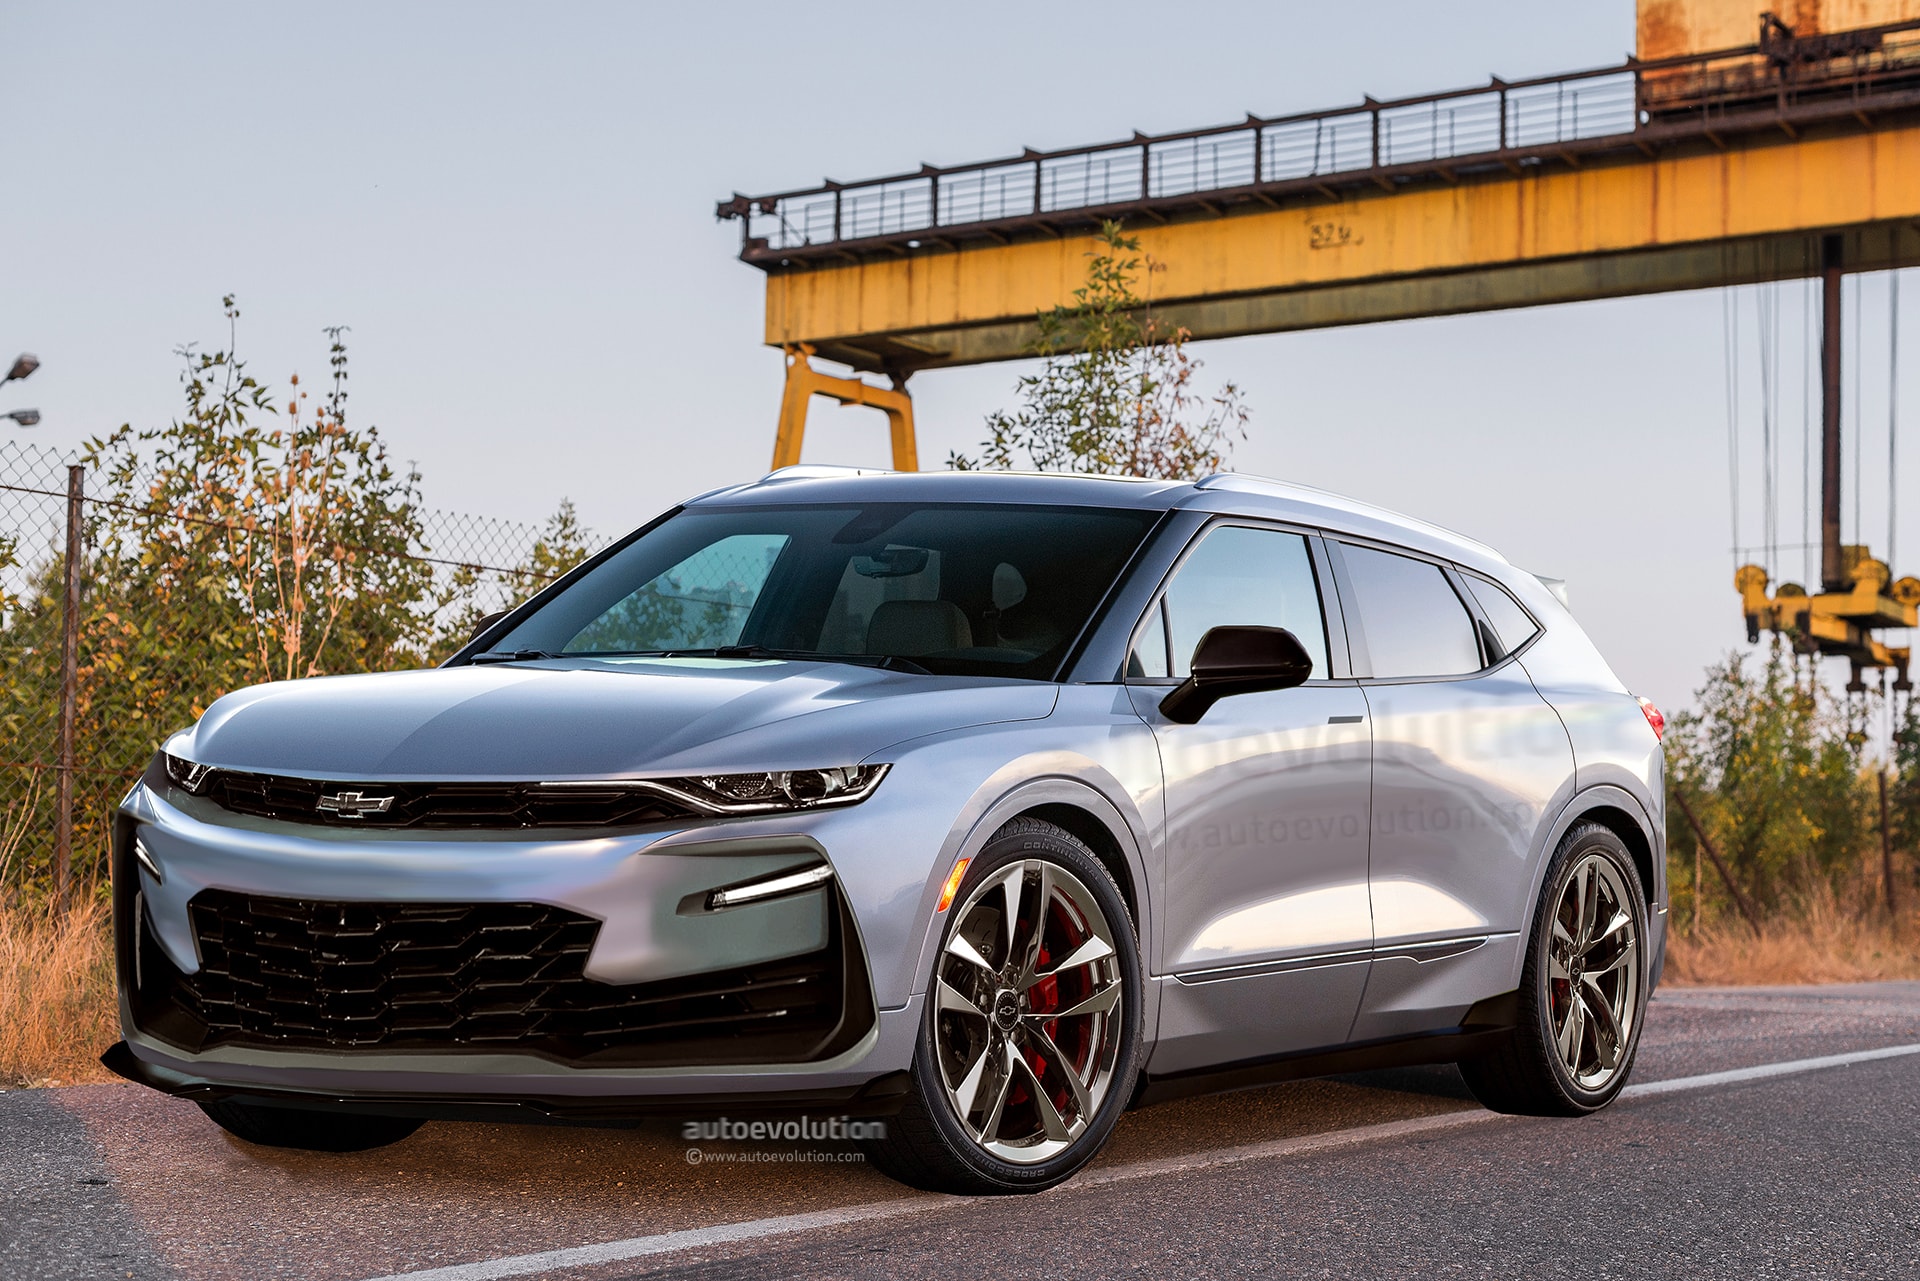 Is This Camaro SUV an Answer to the Mustang Mach-E? - autoevolution